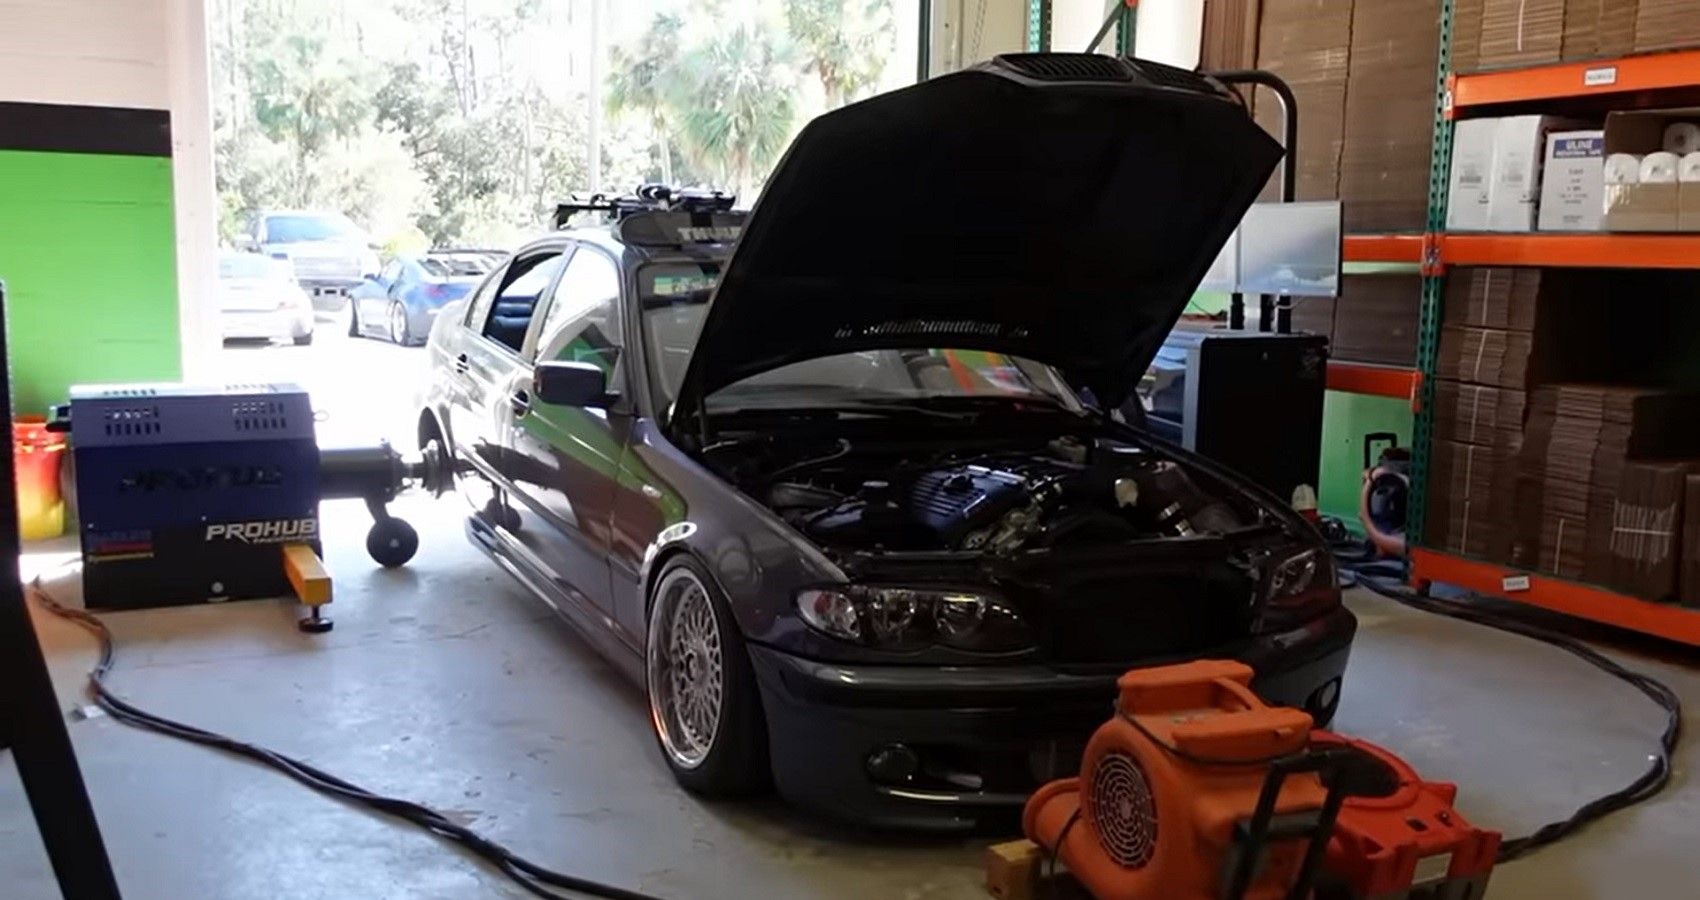 Adam LZ BMW E46 project on dyno, front quarter view of car in garage